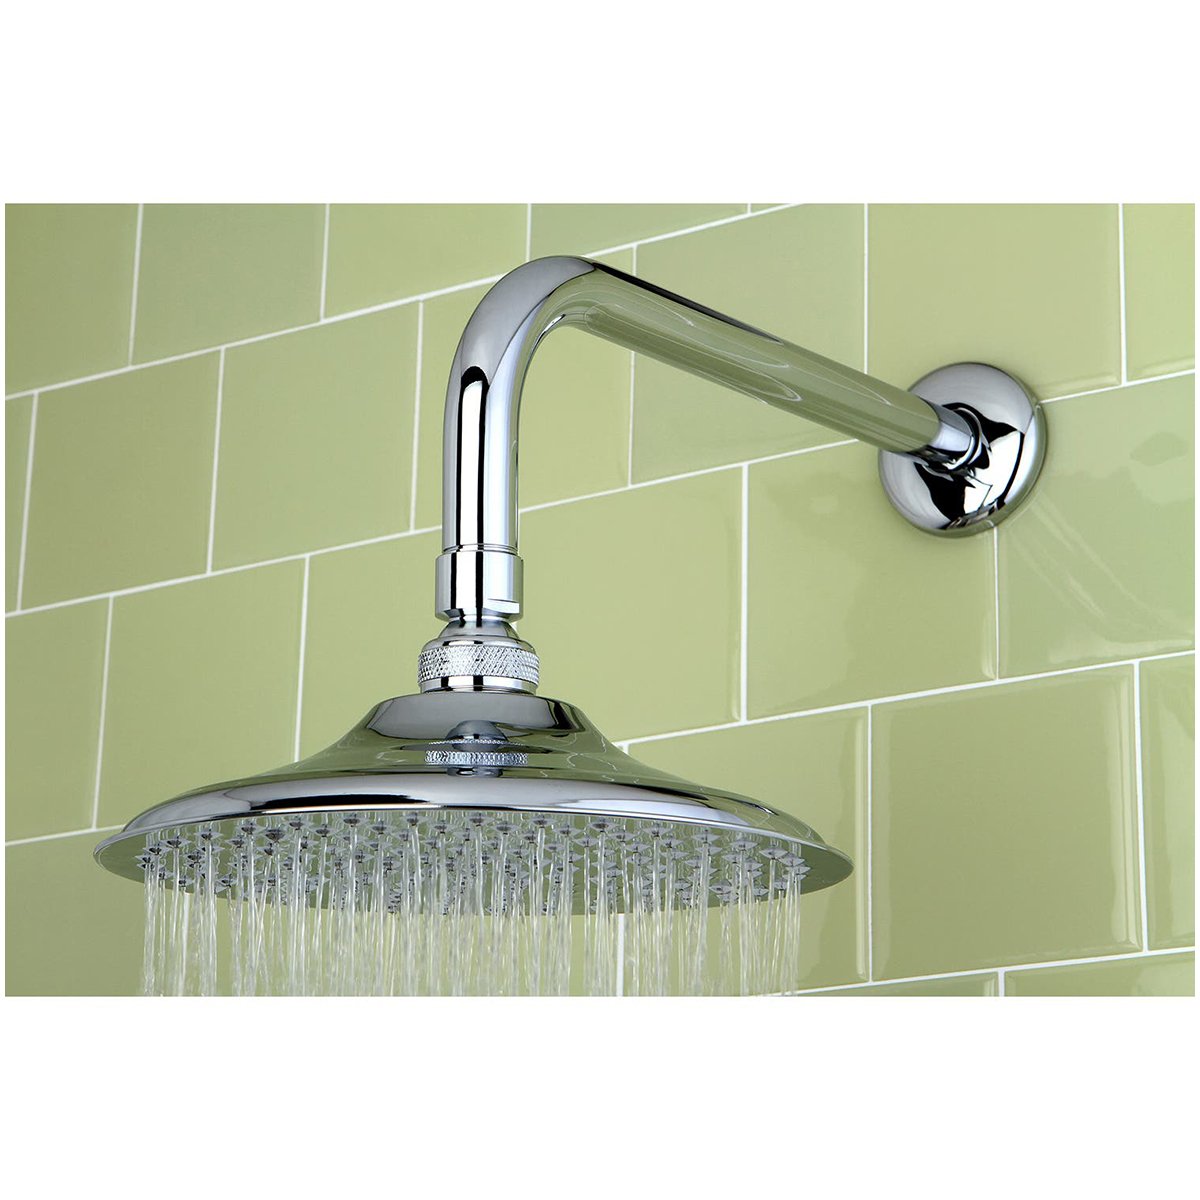 Kingston Brass Victorian 5-1/4" Shower Head with Shower Arm in Polished Chrome